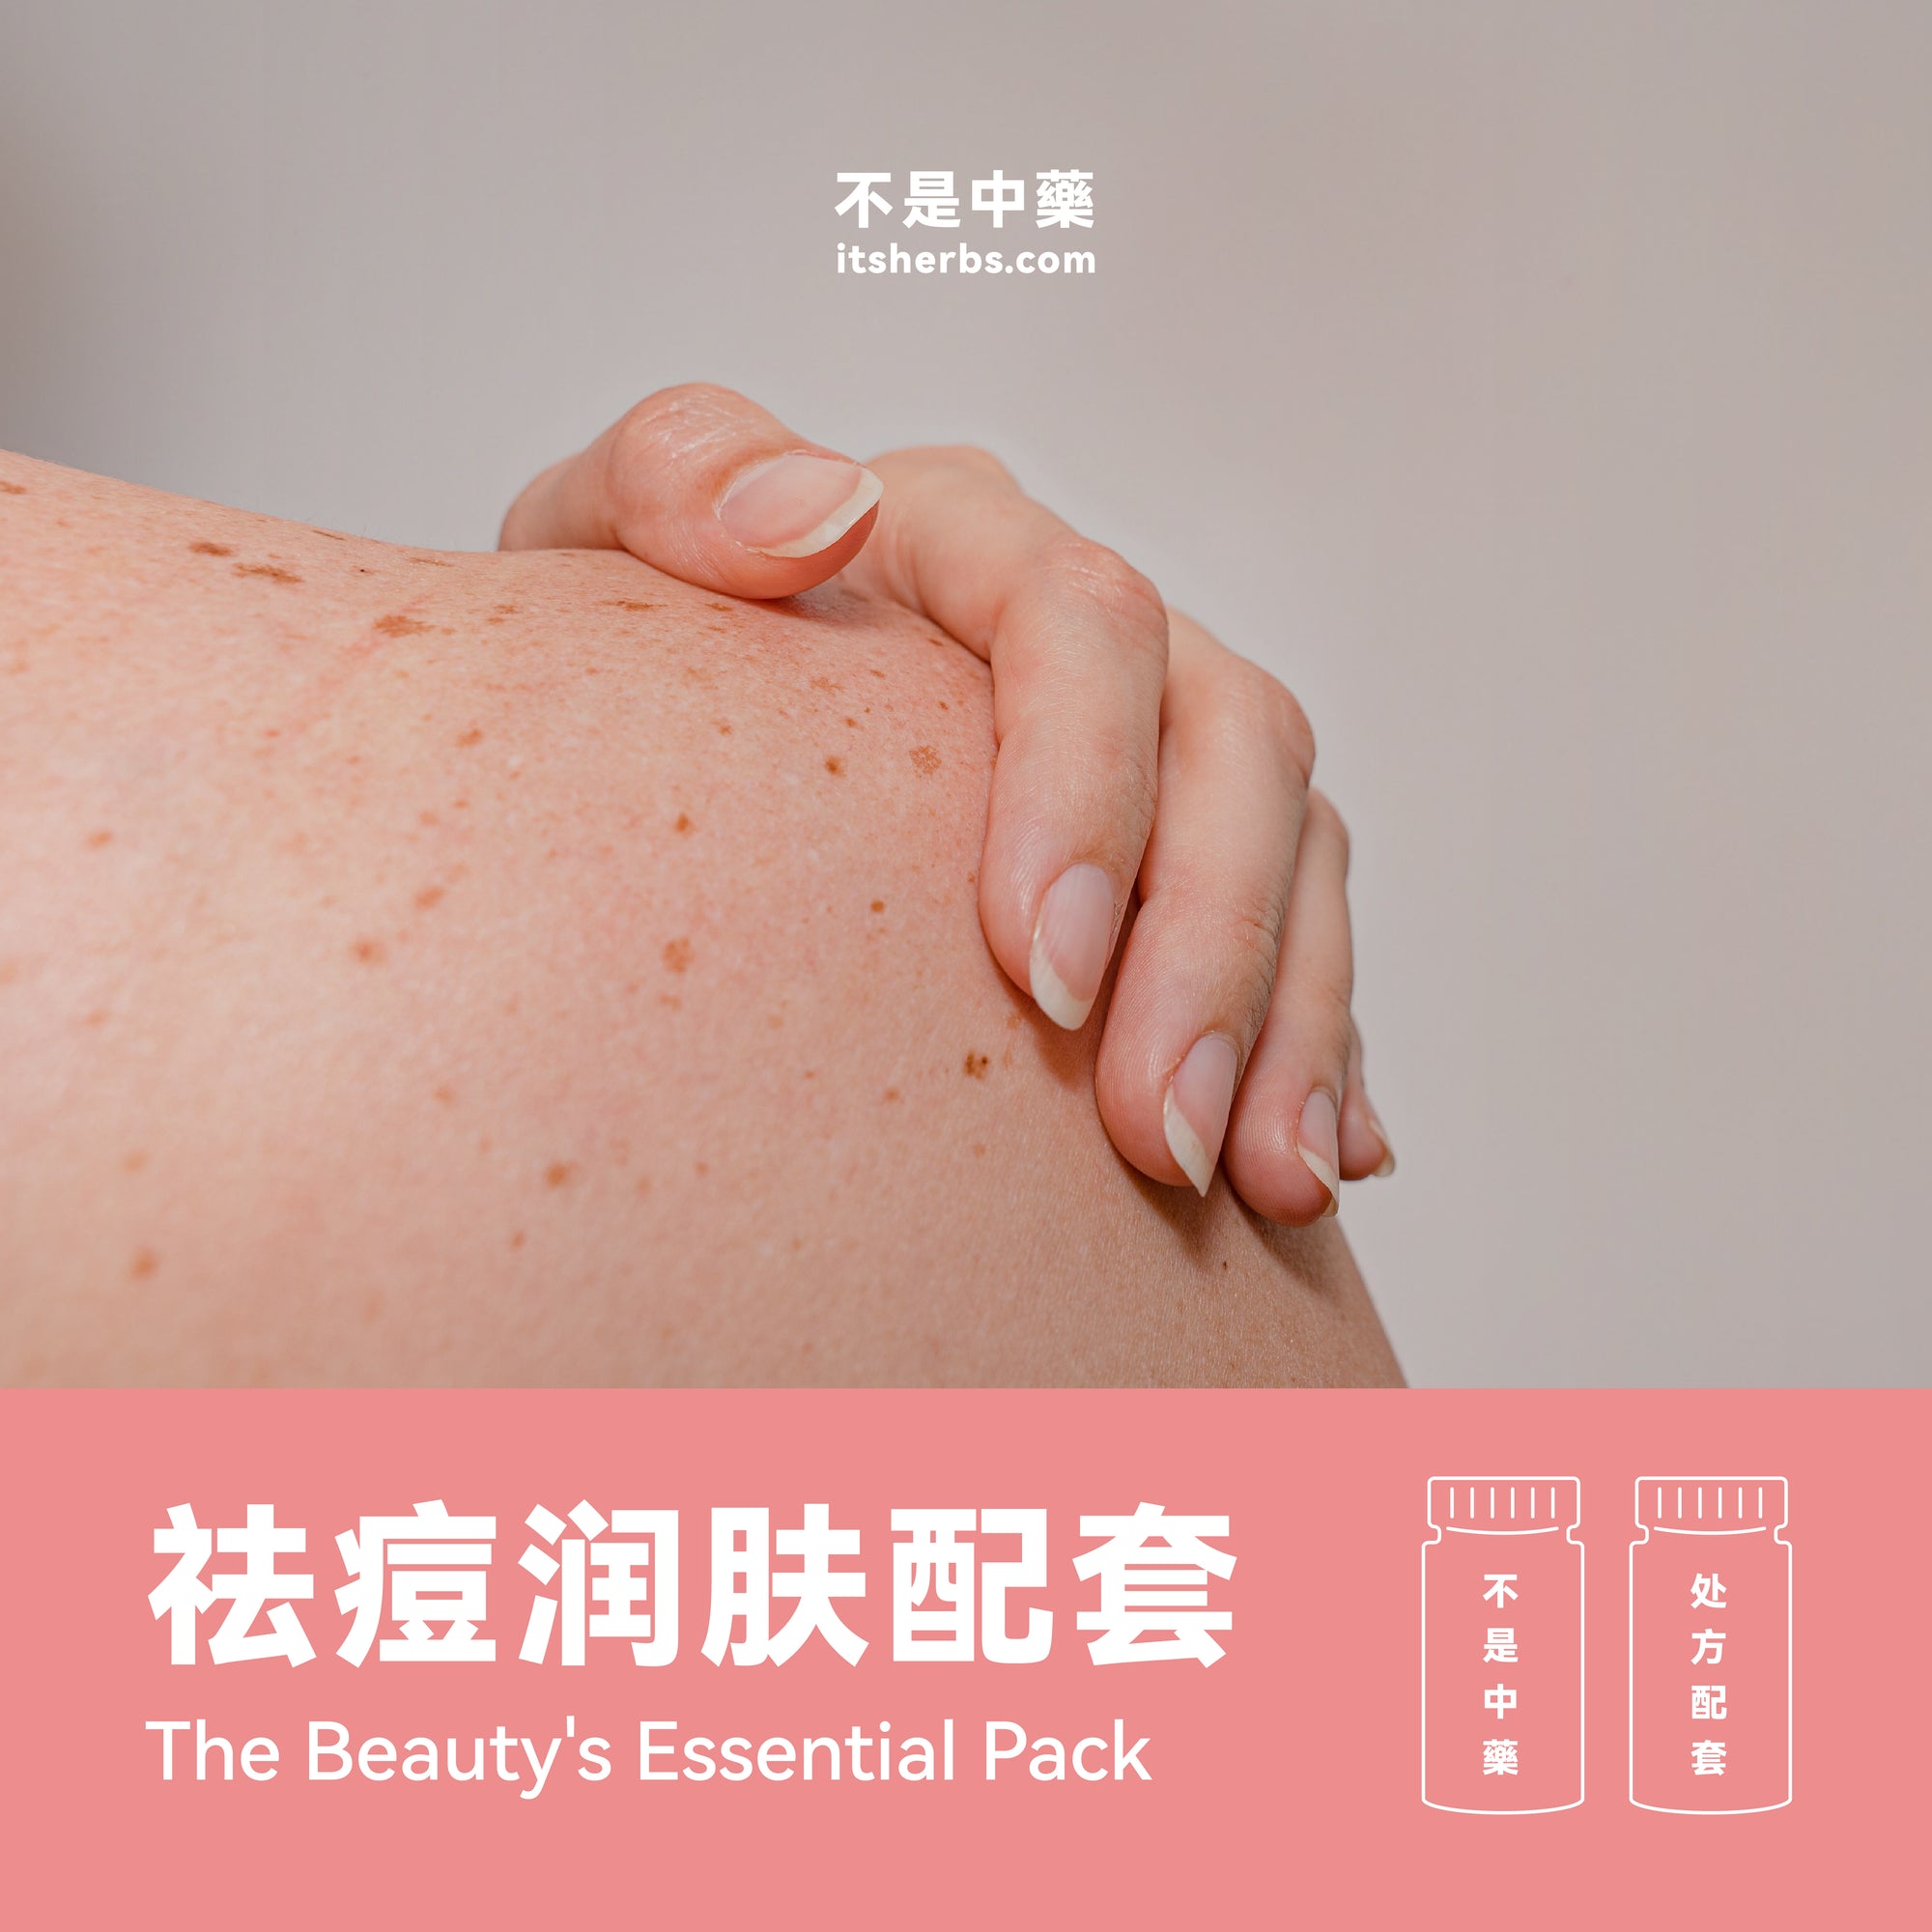 The Beauty’s Essential Pack